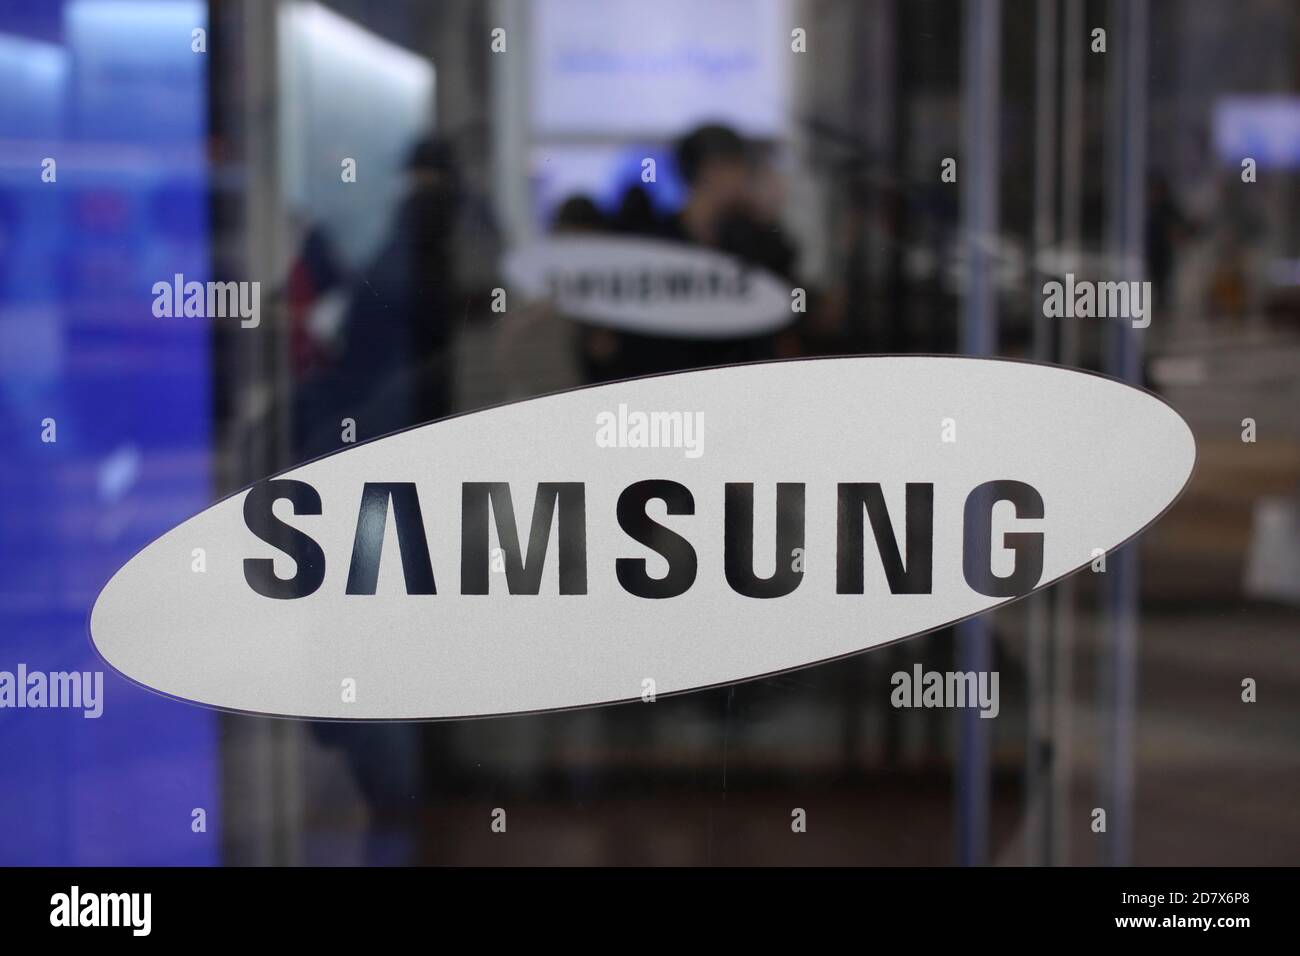 Seoul, SOUTH KOREA. 29th Jan, 2015. Oct 25, 2020-Seoul, South Korea-In This Photos is file photos. Samsung logo displayed at Samsung Group HQ in Seoul, South Korea. Lee Kun-Hee, whot had transformed Samsung Group into one of the world's major tech giant from a small trading firm, died at a hospital in Seoul on Sunday at age 78, leaving a thorny succession challange for his children. The chairman of the flagship Samsung Electronics had been bedridden since May 2014 following a heart attack. Credit: Ryu Seung-Il/ZUMA Wire/Alamy Live News Stock Photo